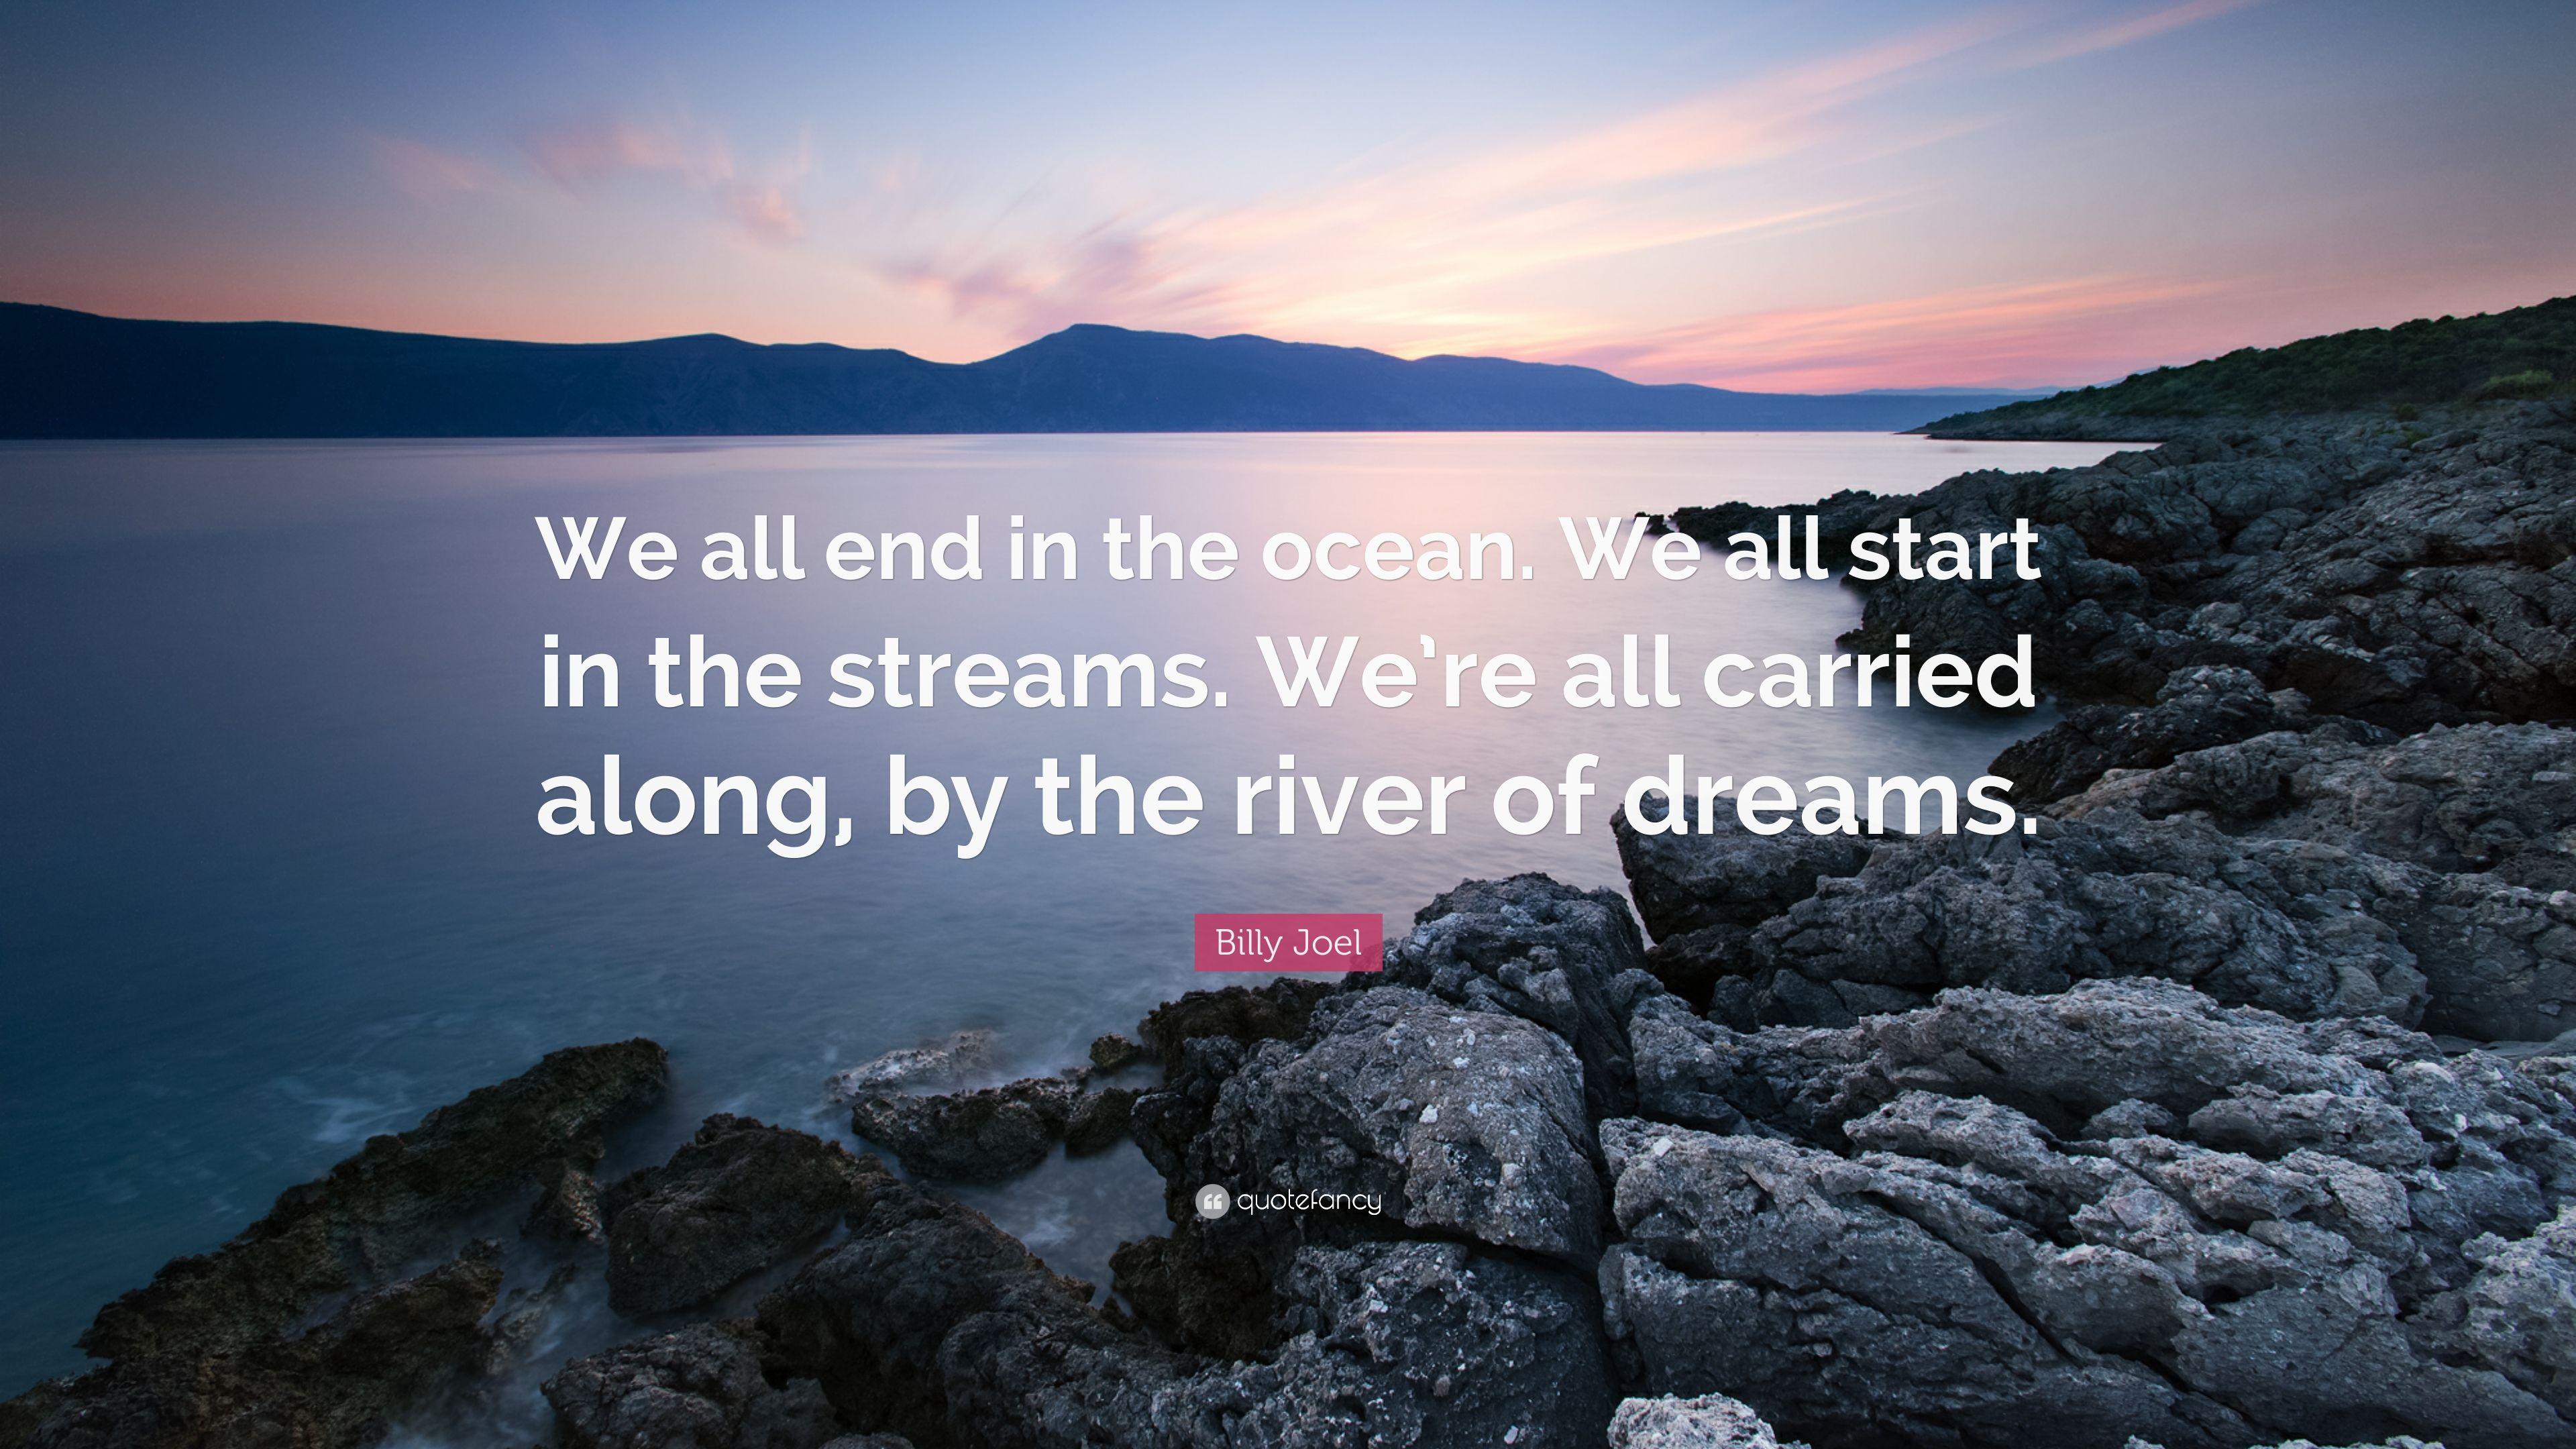 Billy Joel Quote: “We all end in the ocean. We all start in